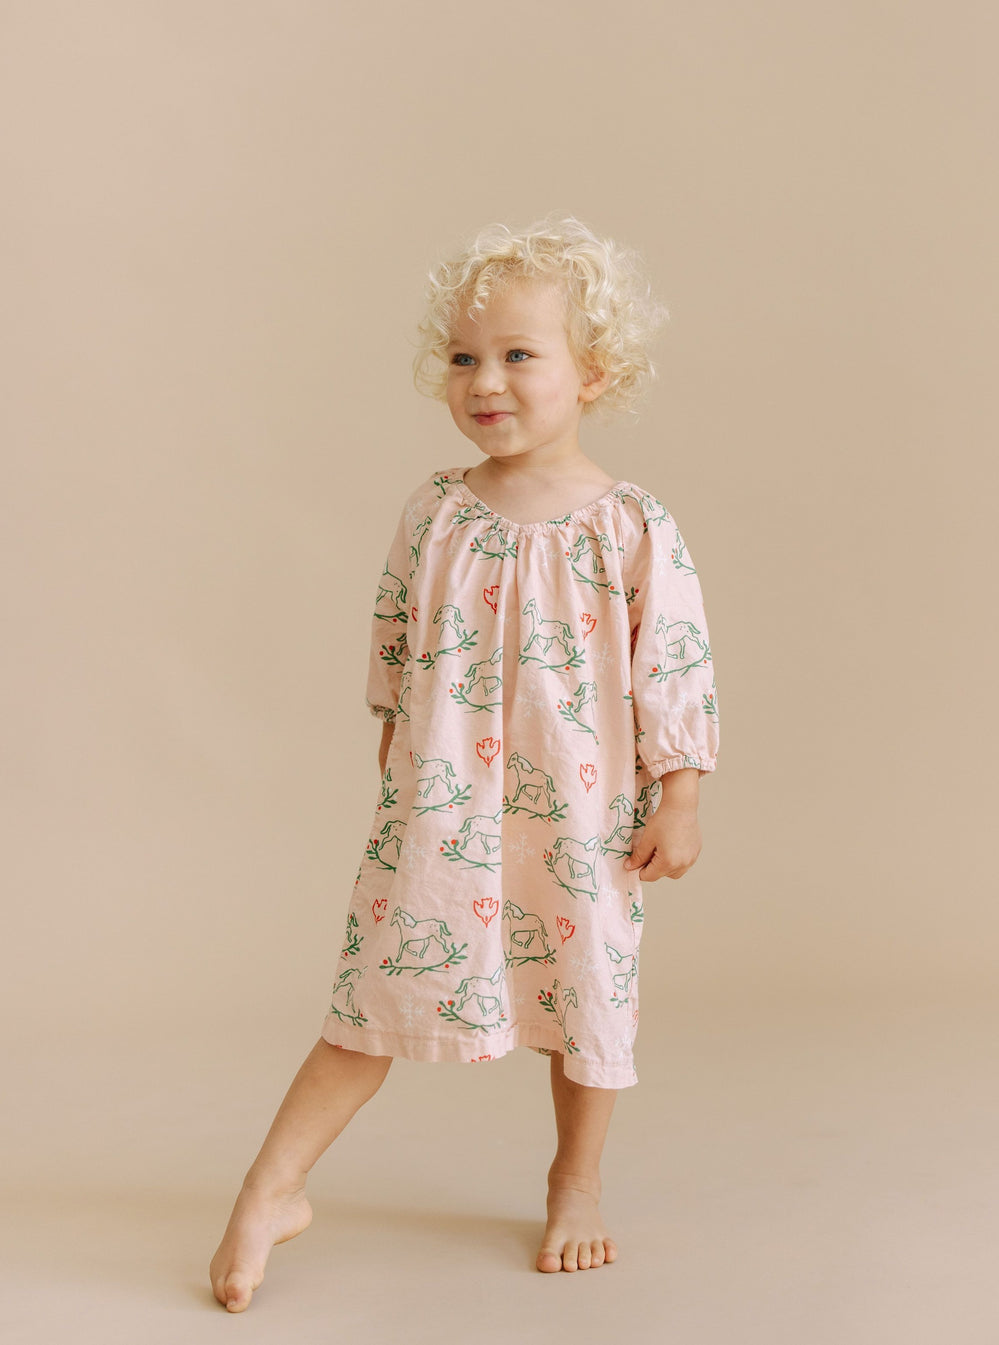 Girl's Parker House Dress in Holly Horse